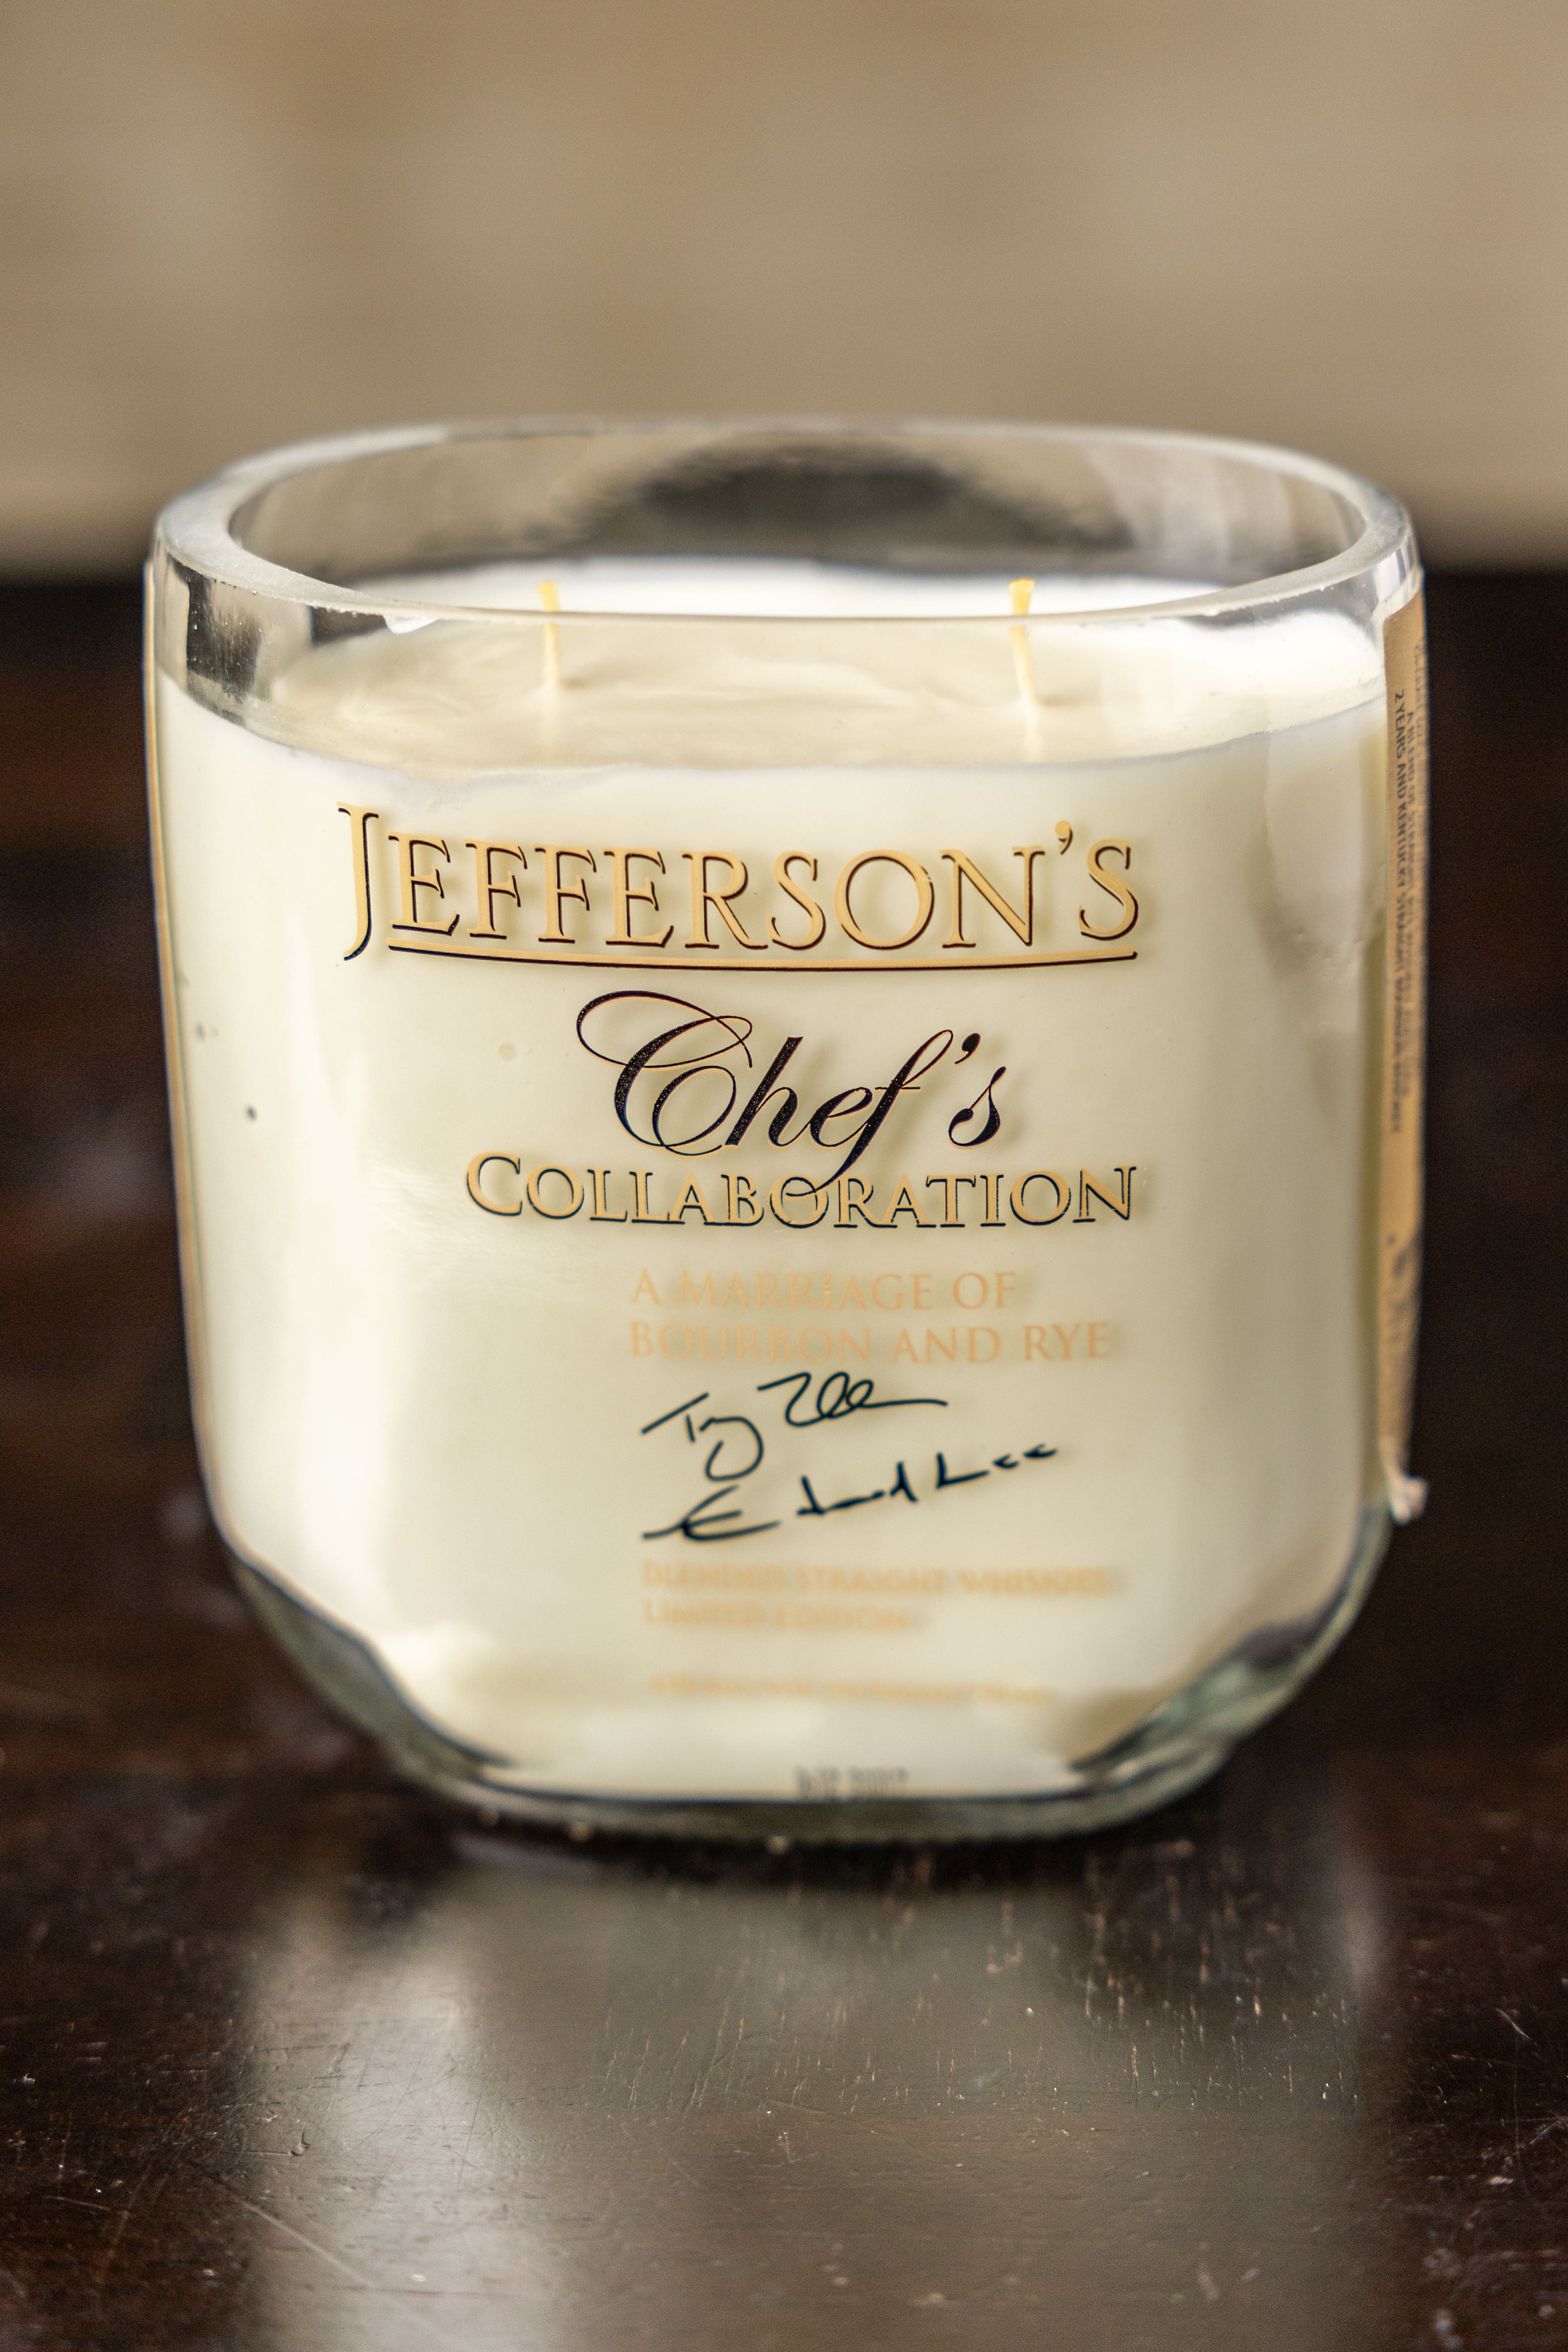 Jefferson's Chef's Collaboration Bottle Candle